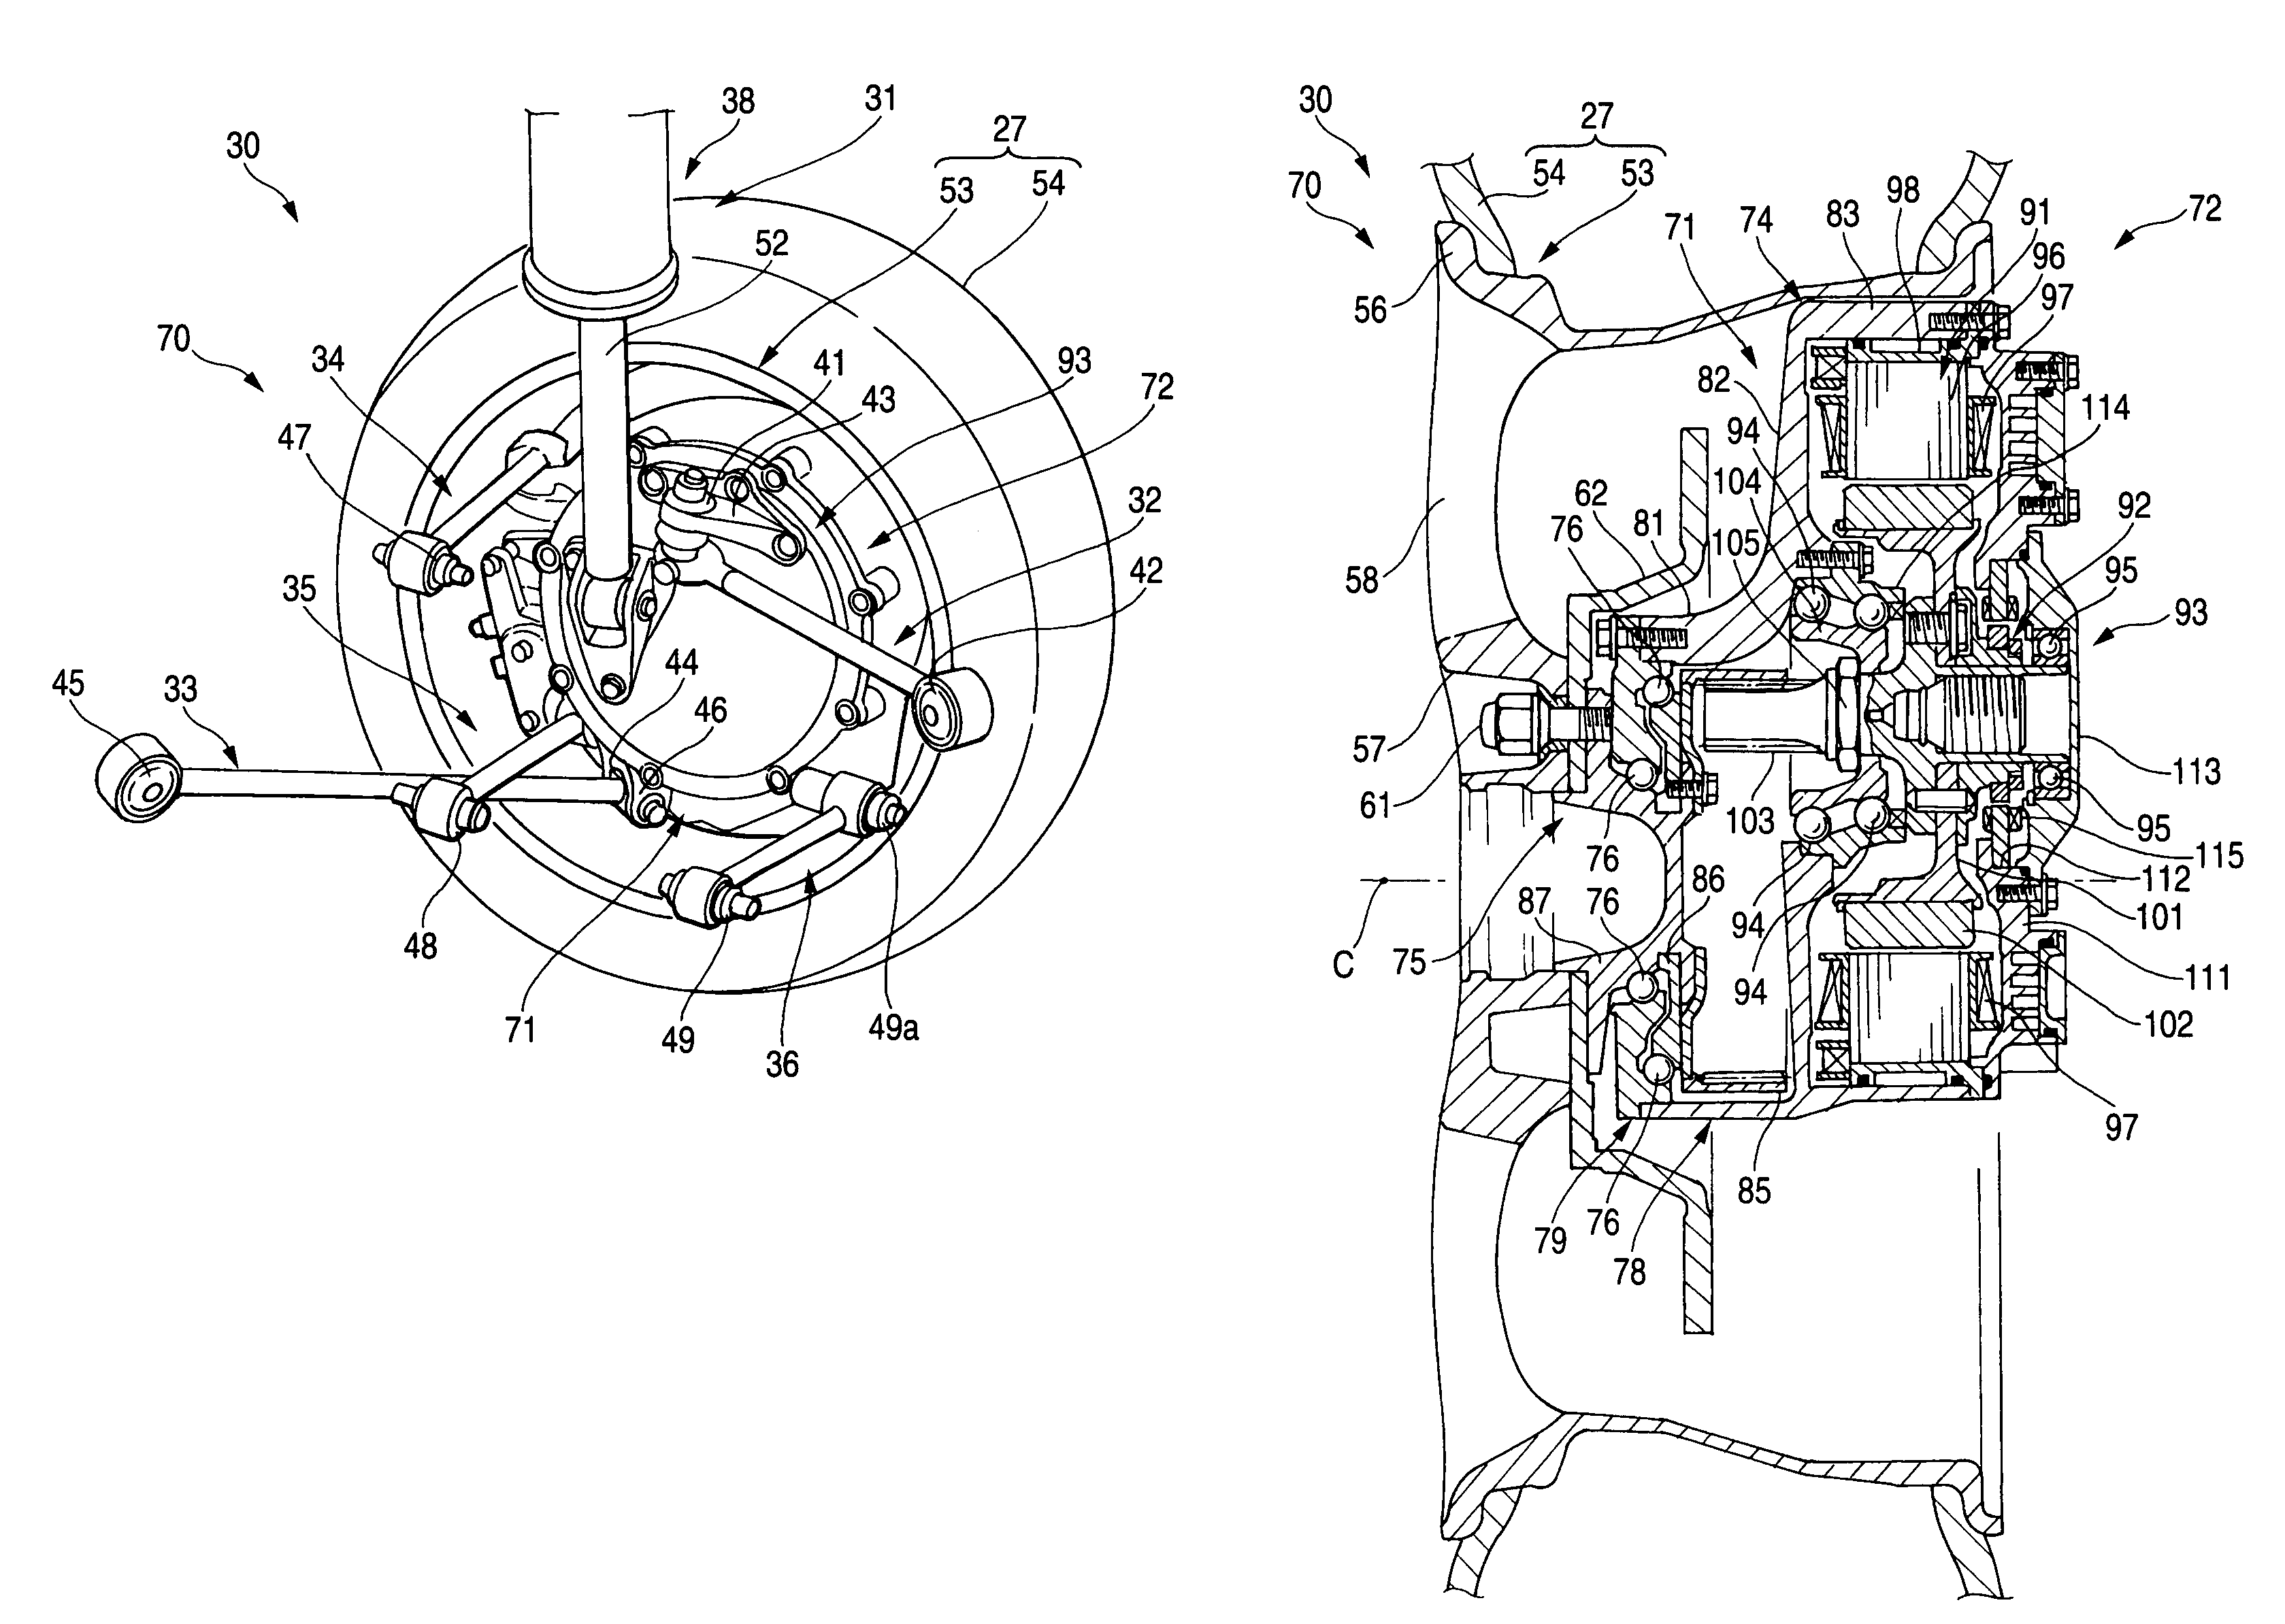 Vehicle wheel driving apparatus arranging structure